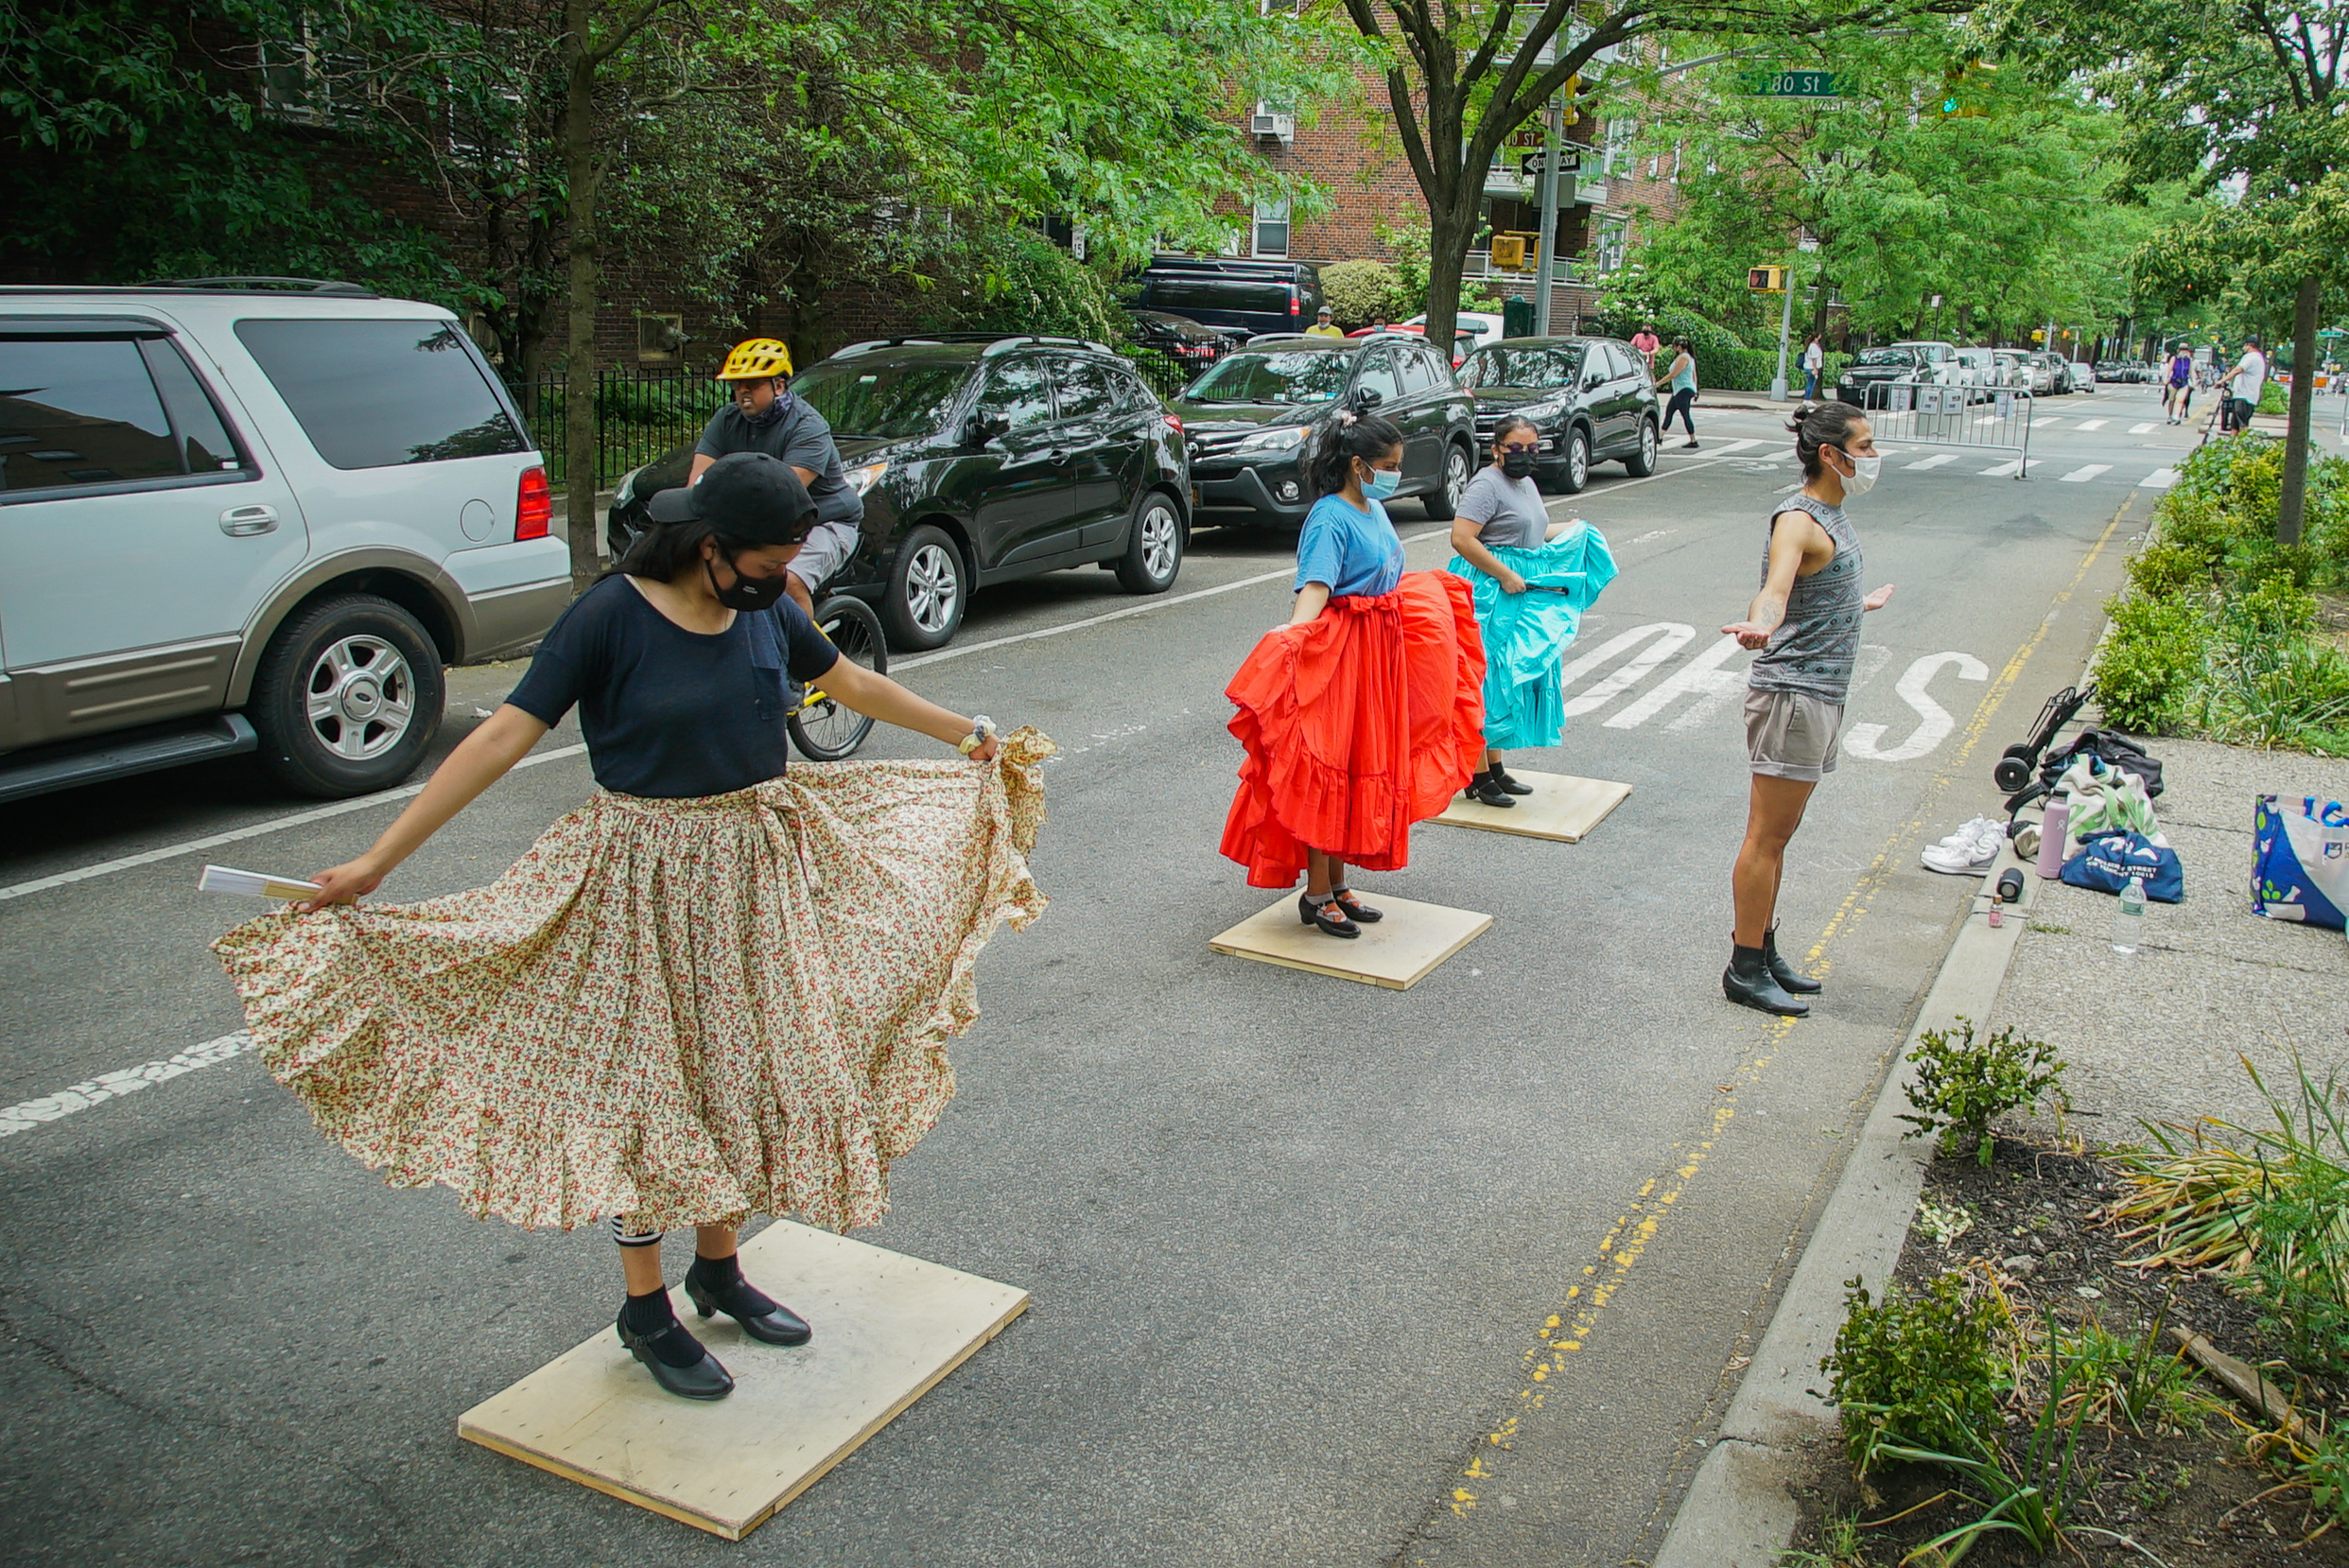 Rehearsing on 34th Avenue, three dancers stand on small wooden platforms and hold their skirts, preparing to practice steps in their routine. Erick stands in front of them and demonstrates the pose.